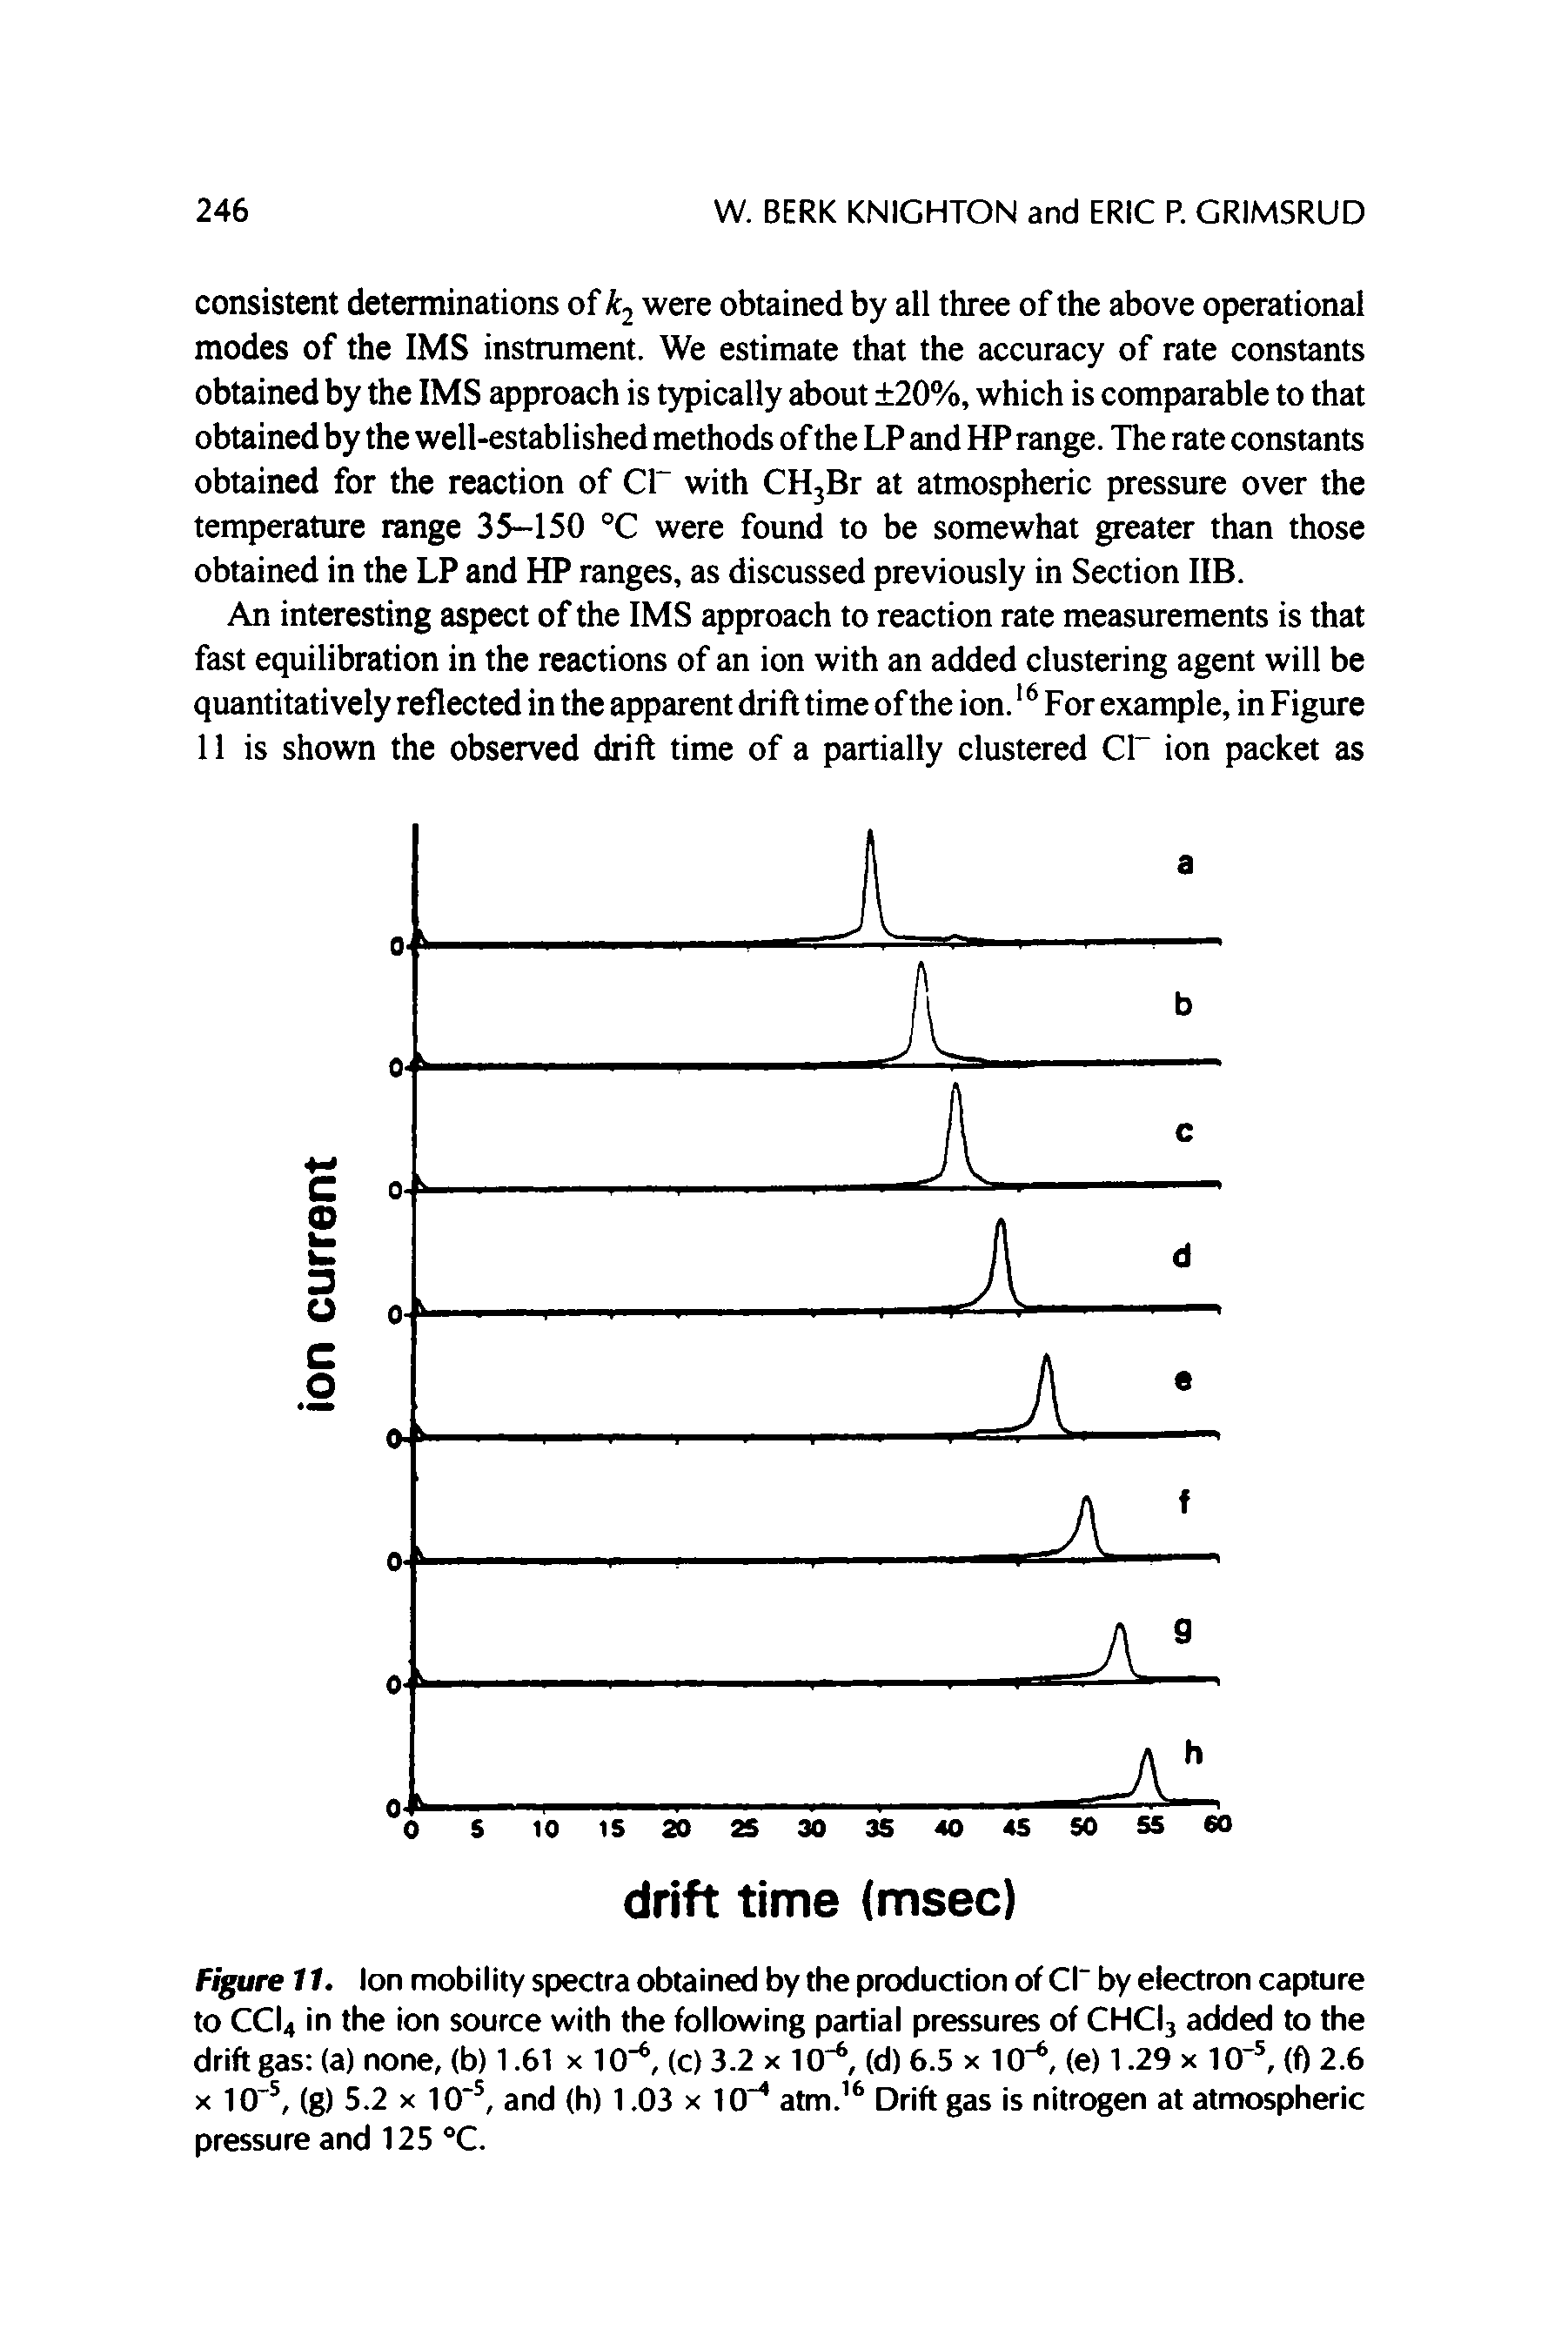 Figure 11. Ion mobility spectra obtained by the production of Cl" by electron capture to CCI4 in the ion source with the following partial pressures of CHCI3 added to the drift gas (a) none, (b) 1.61x10", (c) 3.2 x 10", (d) 6.5 x 10", (e) 1.29 x 10" , (f) 2.6...